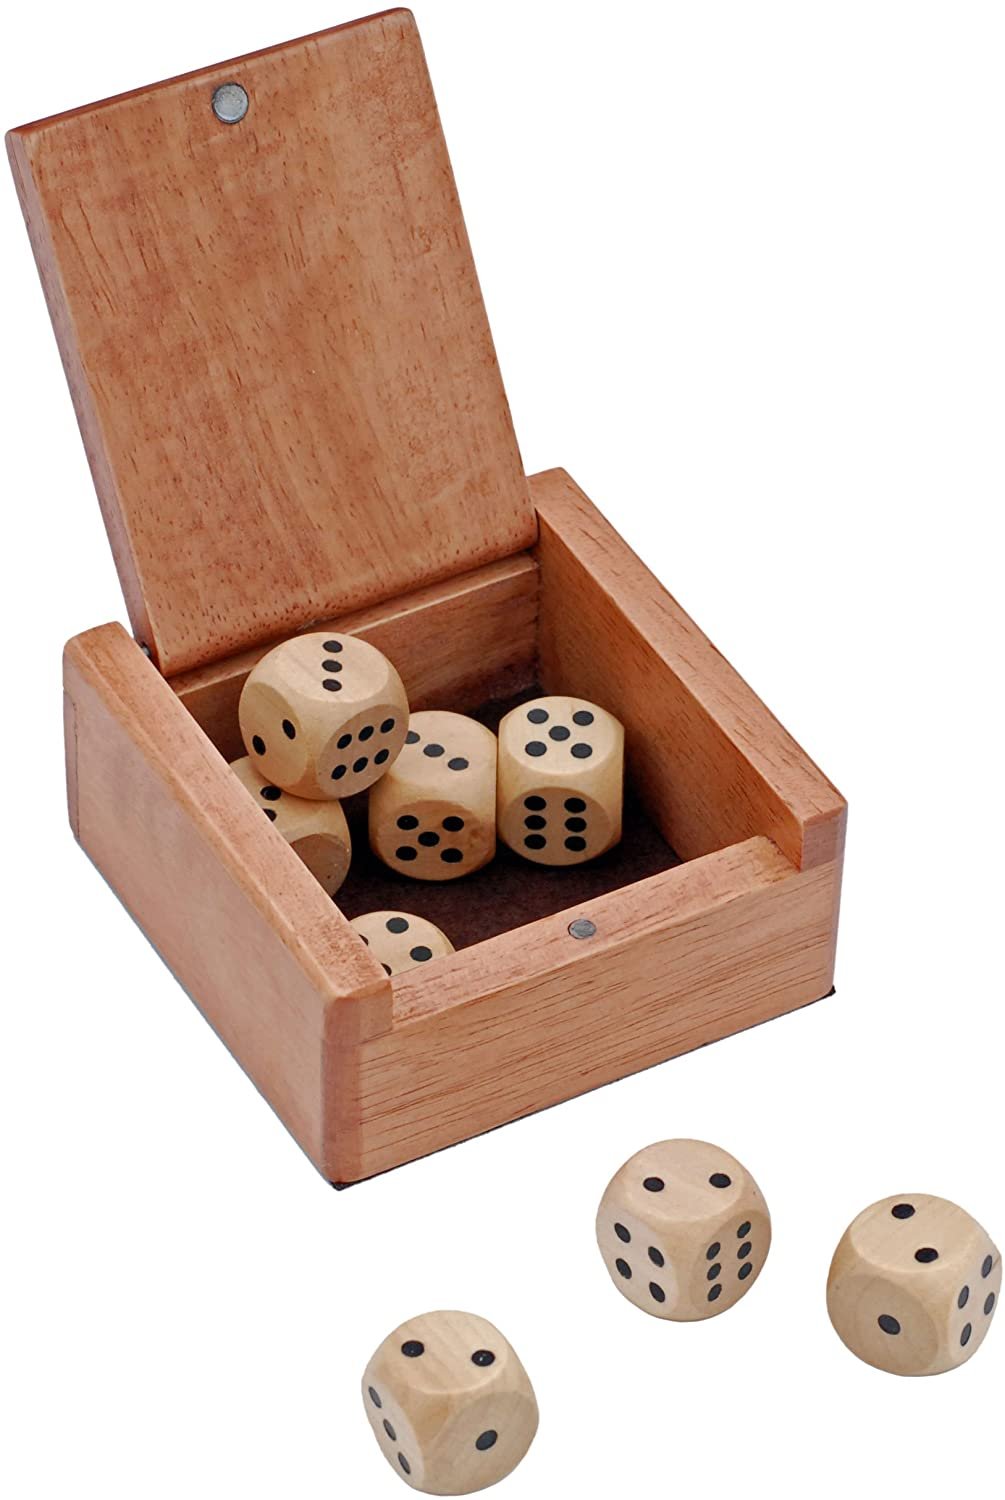 WE Games Wooden Dice Box and 8 Wooden Dice